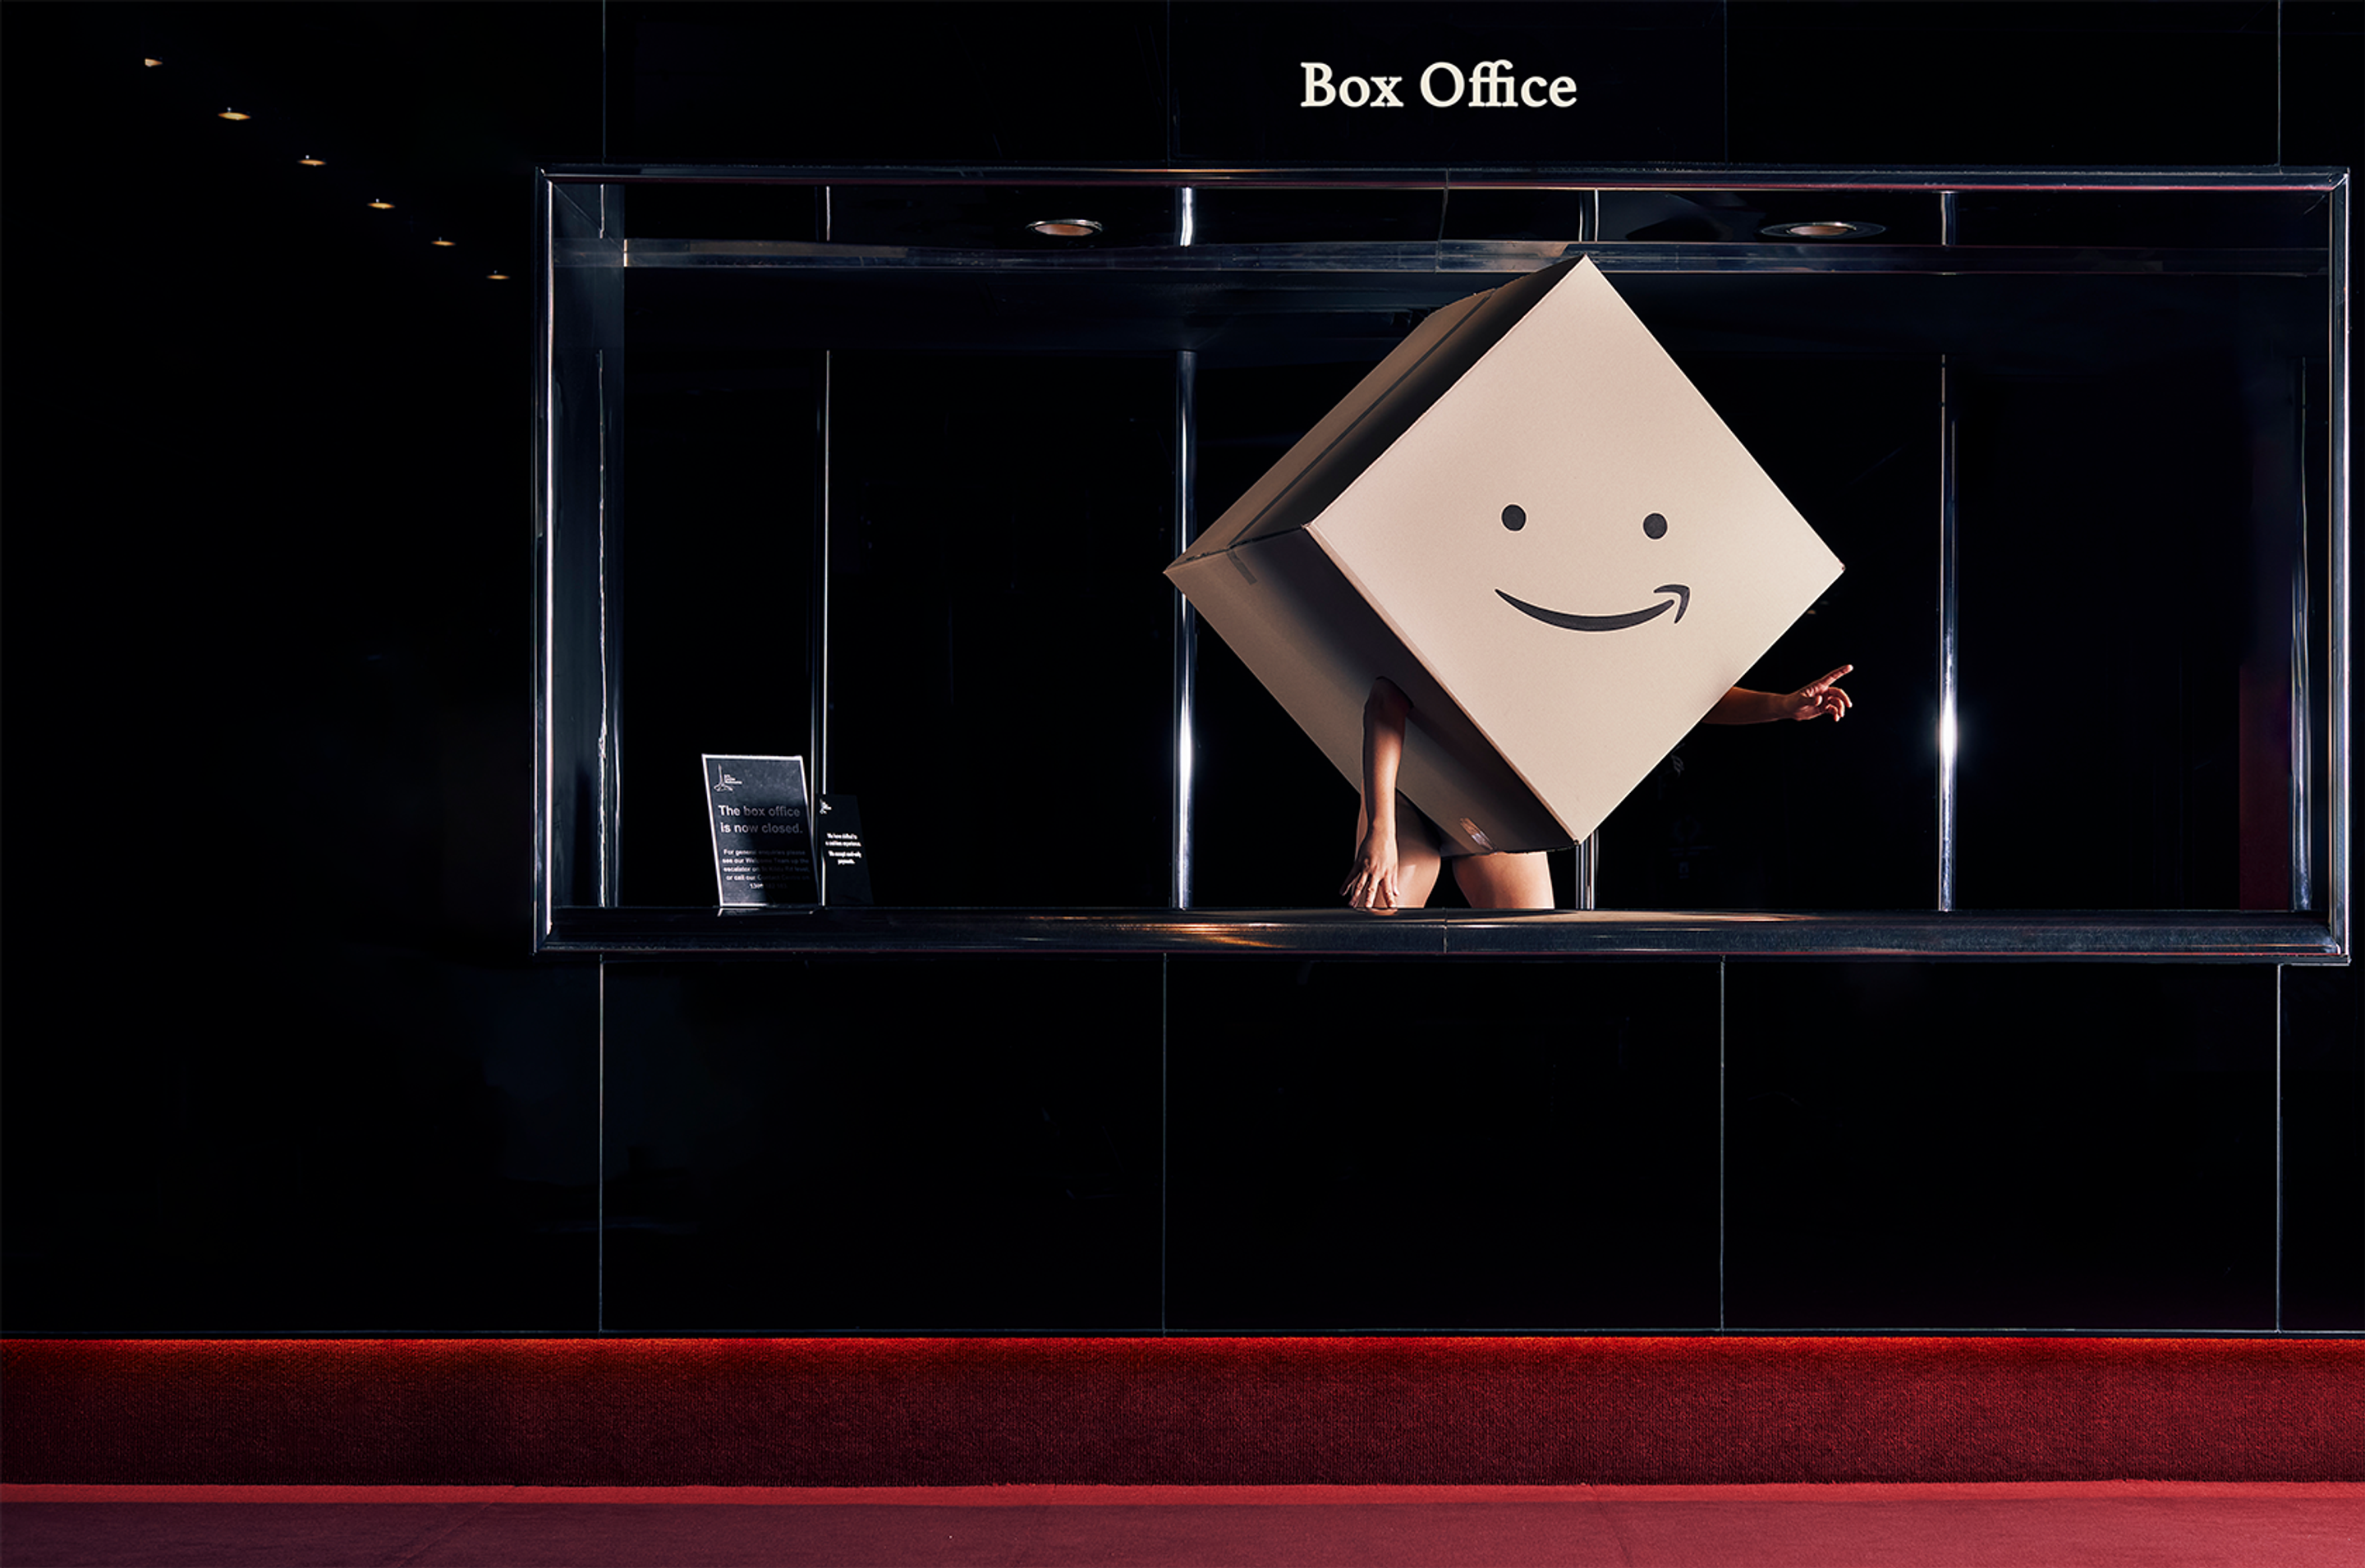 A person wearing a giant box, printed with a smile on the front, stands in a dim Box Office. 